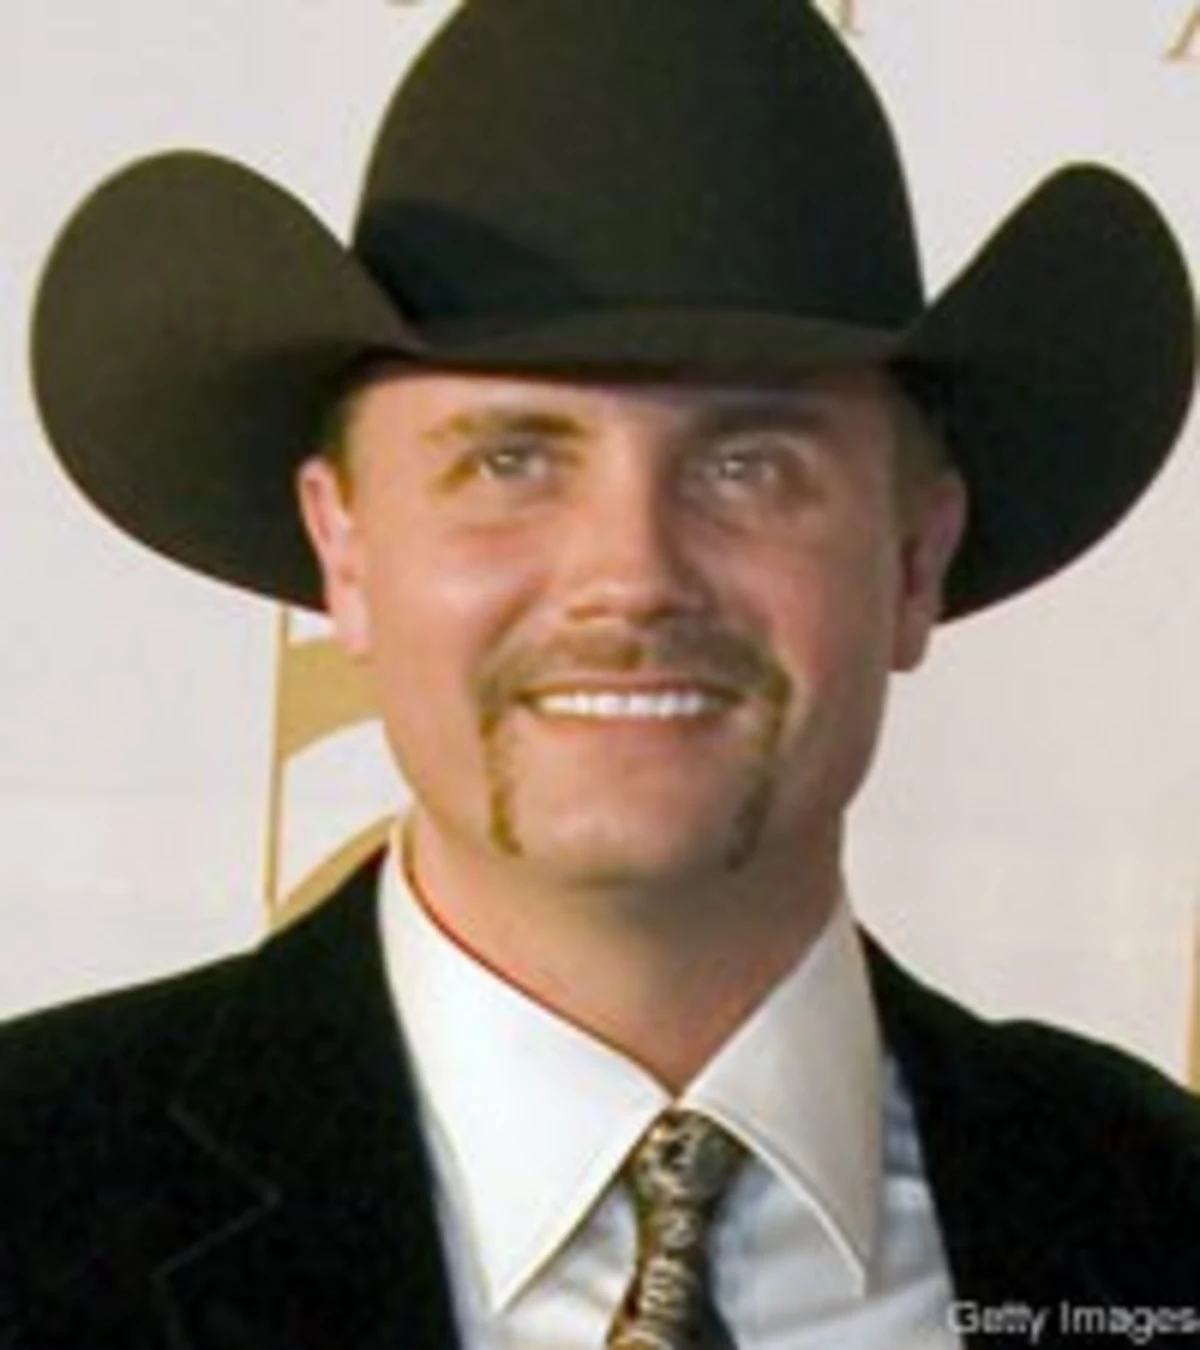 John Rich Reveals More About Music, Less About Love